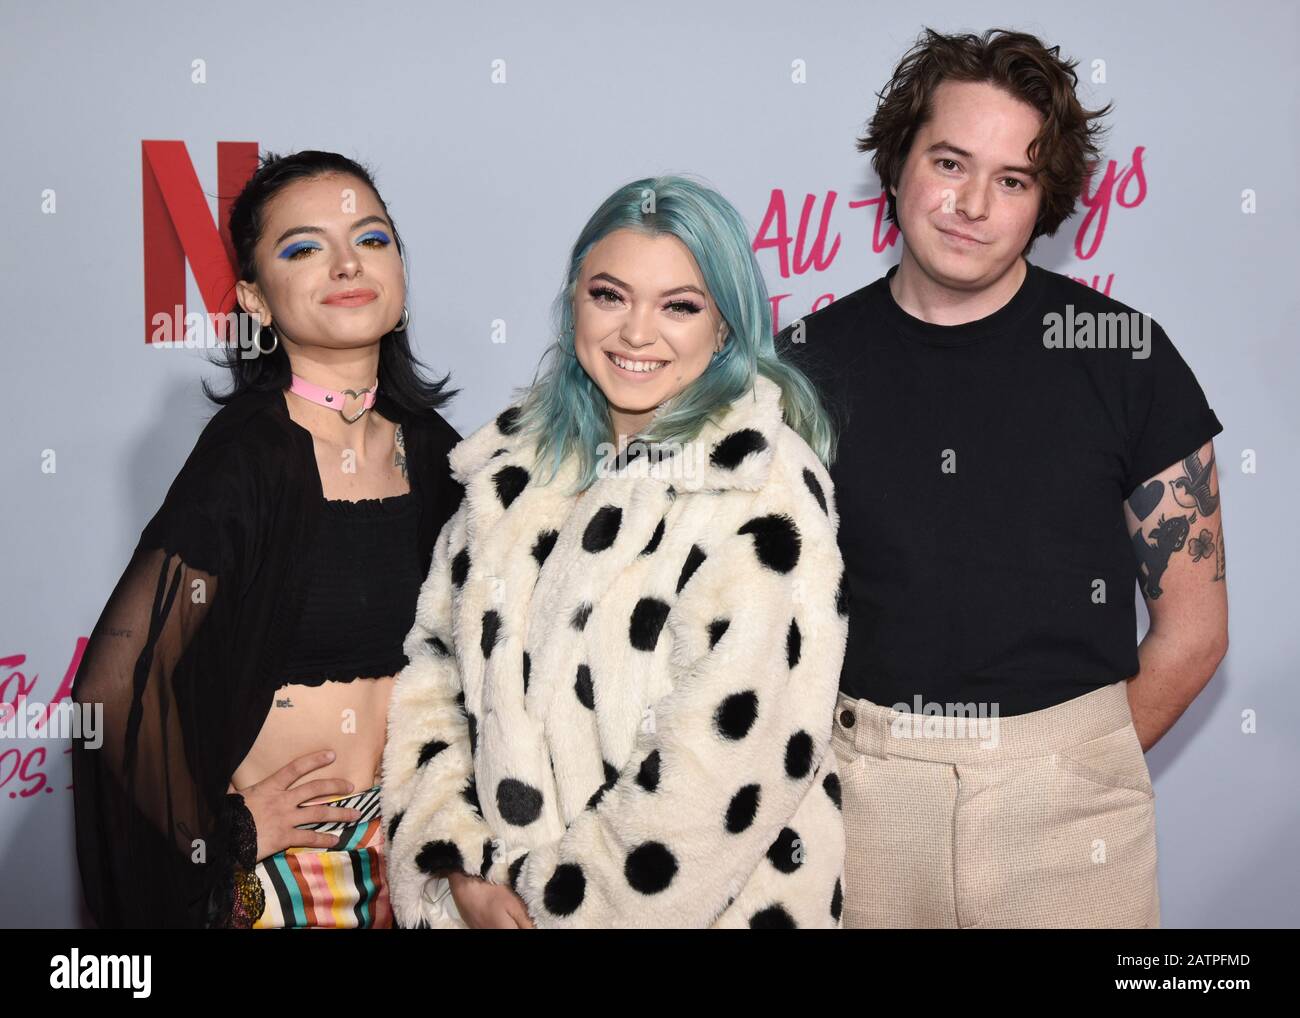 03 February 2020 - Hollywood, California - Rena Lovelis, Nia Lovelis and  Casey Moreta of Hey Violet. Premiere Of Netflix's ''To All The Boys: P.S. I  Still Love You'' at The Egyptian